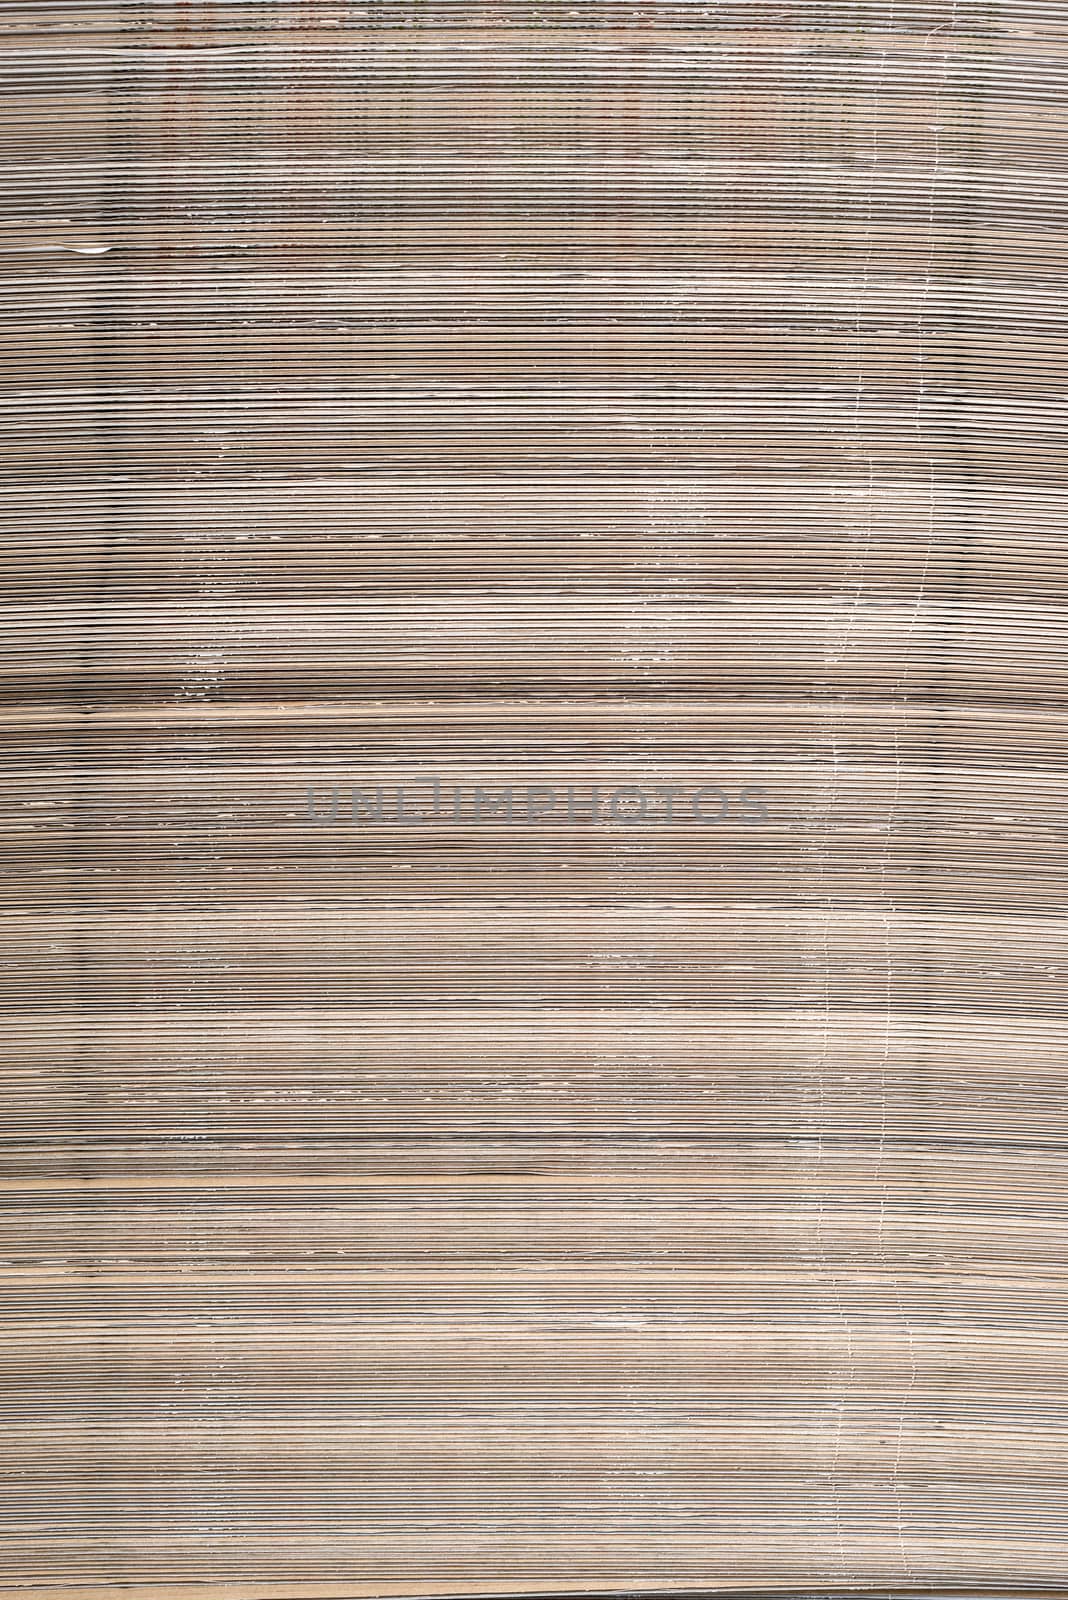 Stack of corrugated cardboard in a large pile